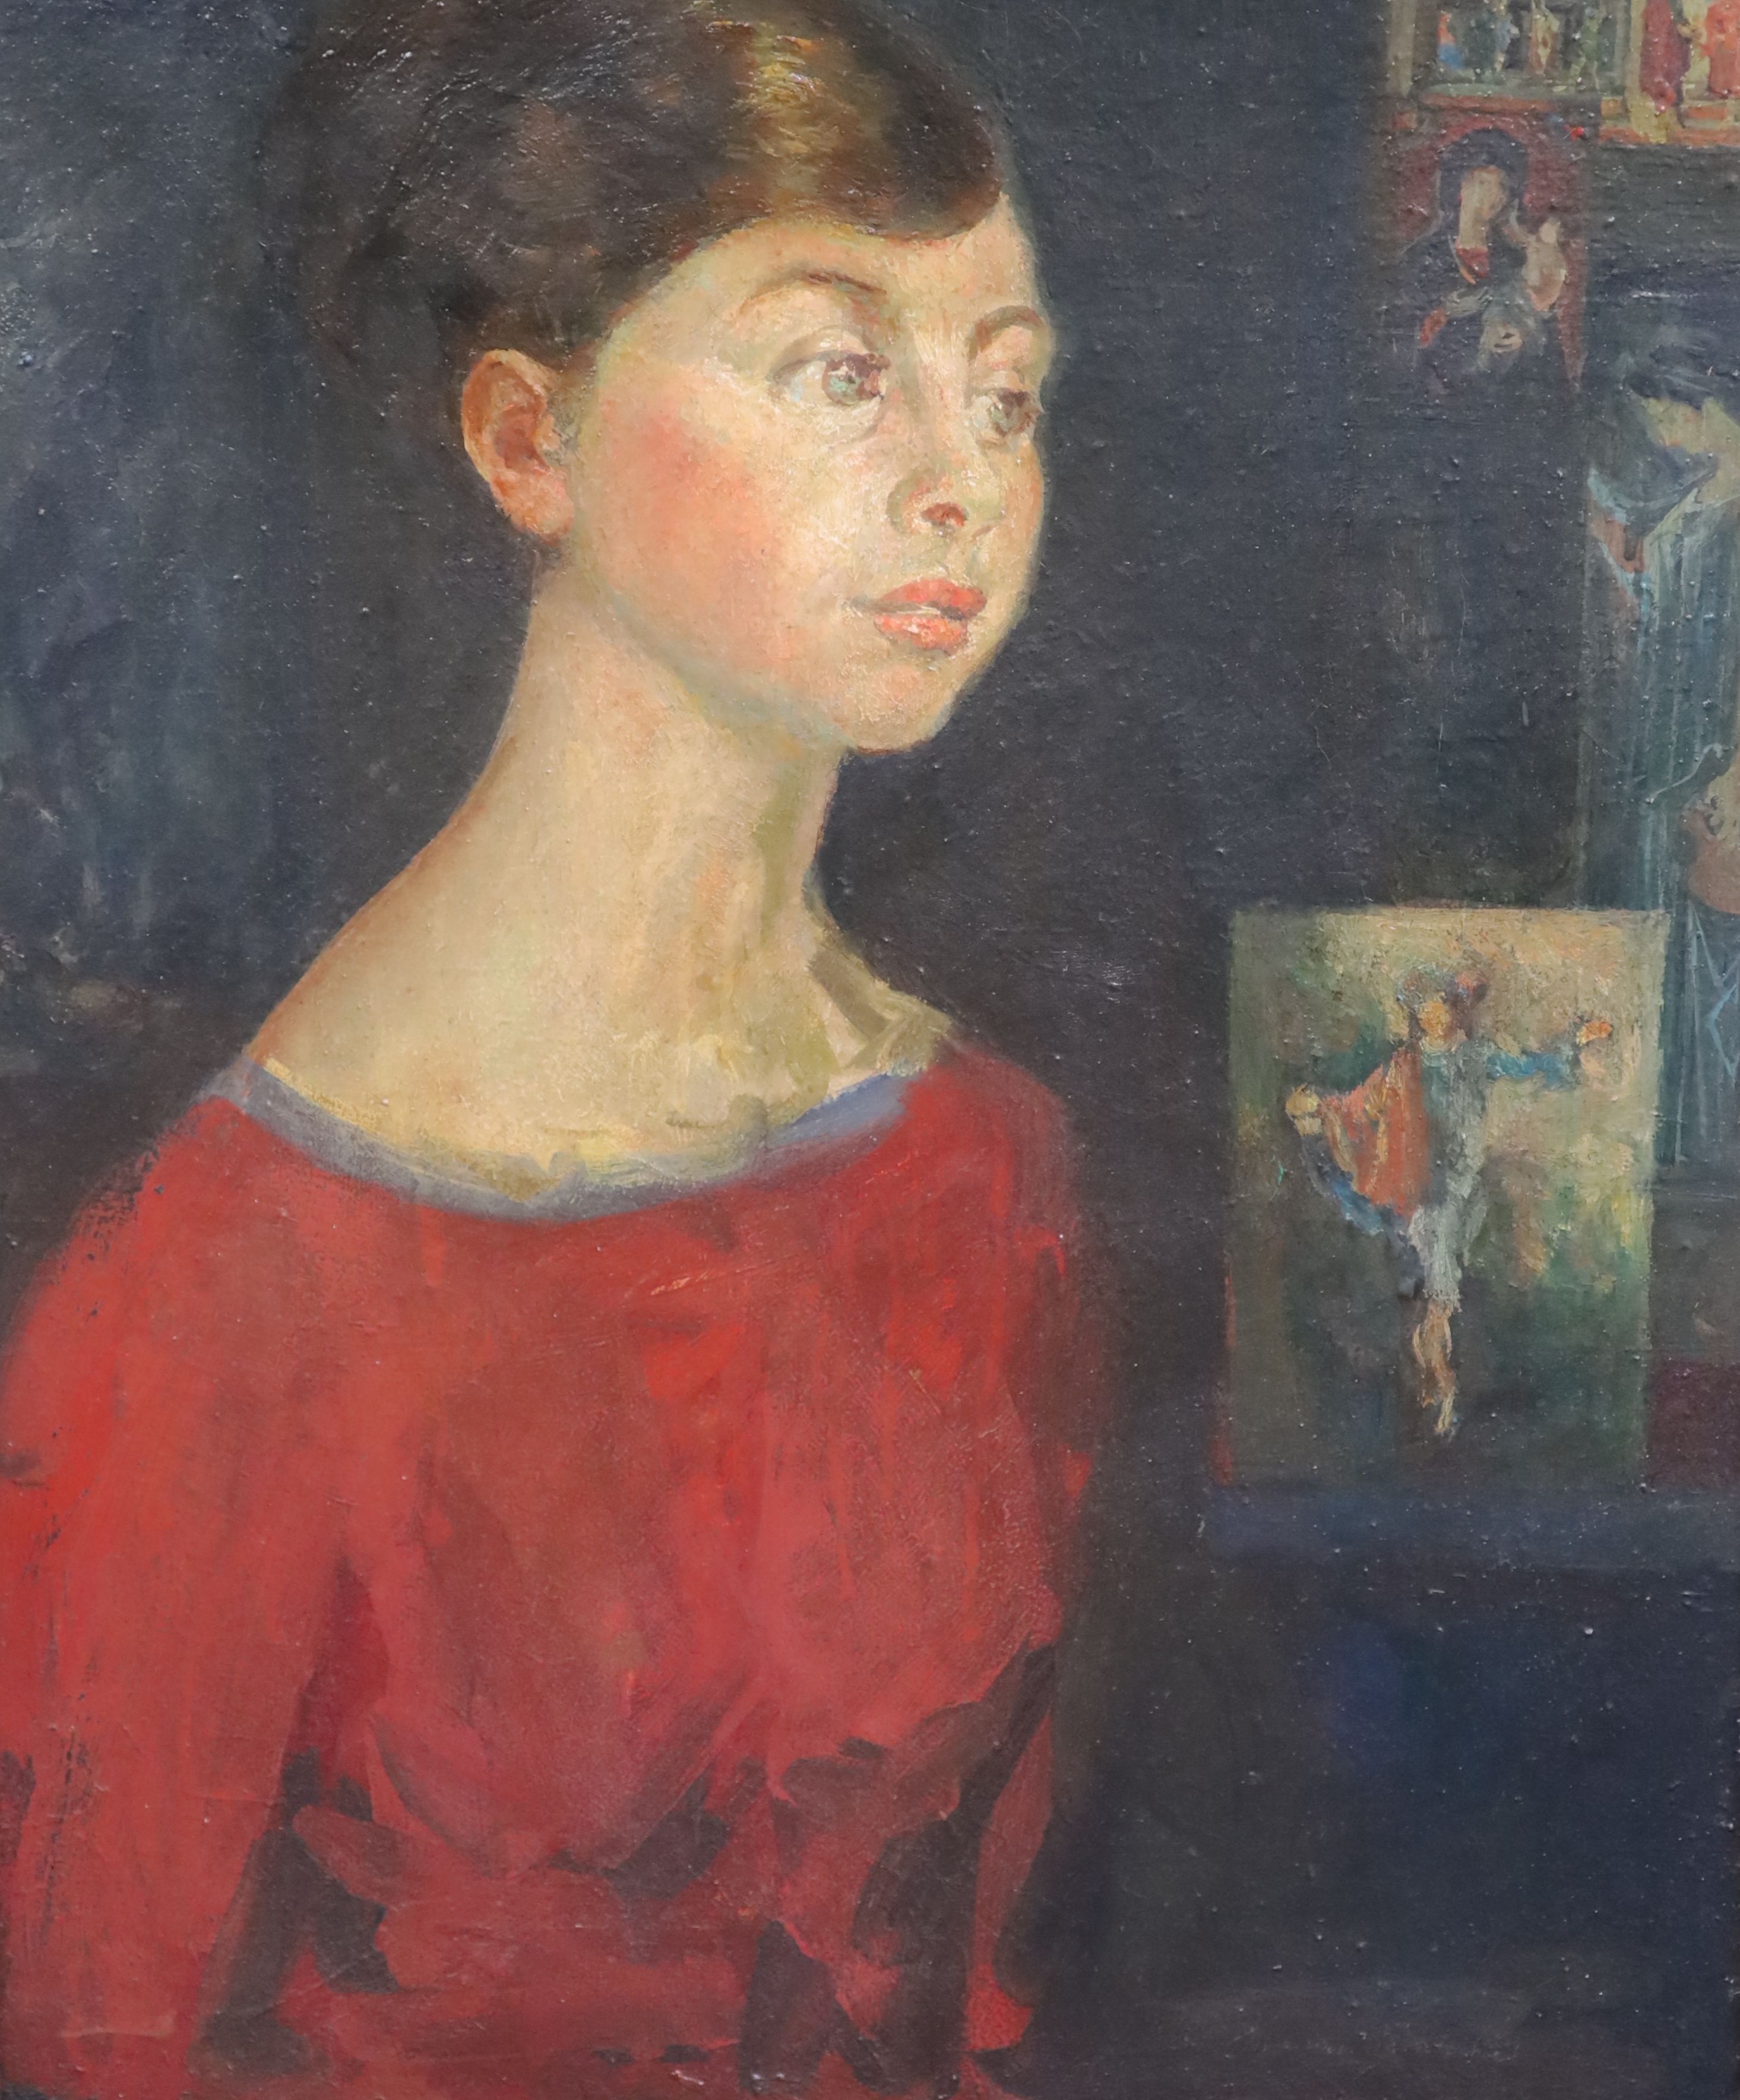 Marian Kratochwil (Polish, 1906-1997), Portrait of a young lady with religious imagery beyond, oil on canvas, 51 x 41cm